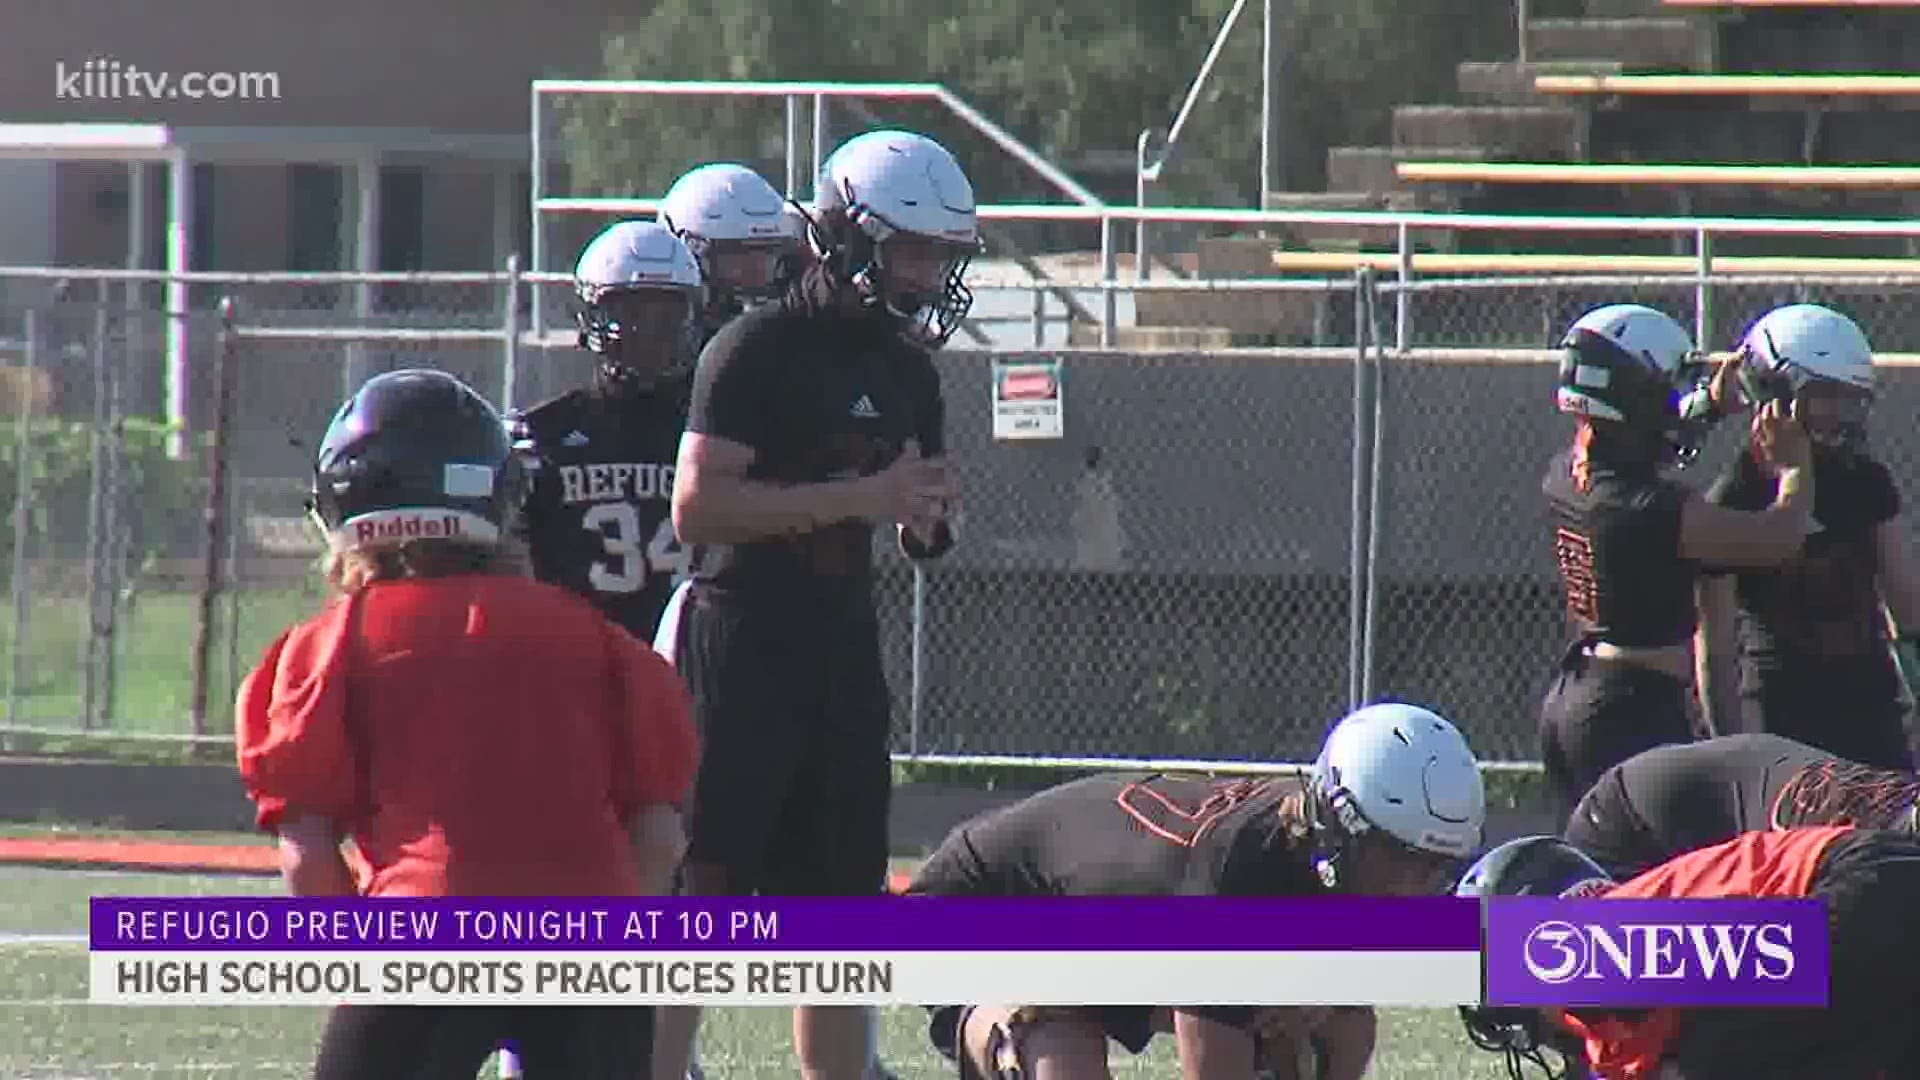 Several of the area's small schools (classes 4A-1A) got underway with their fall sports practices Monday.